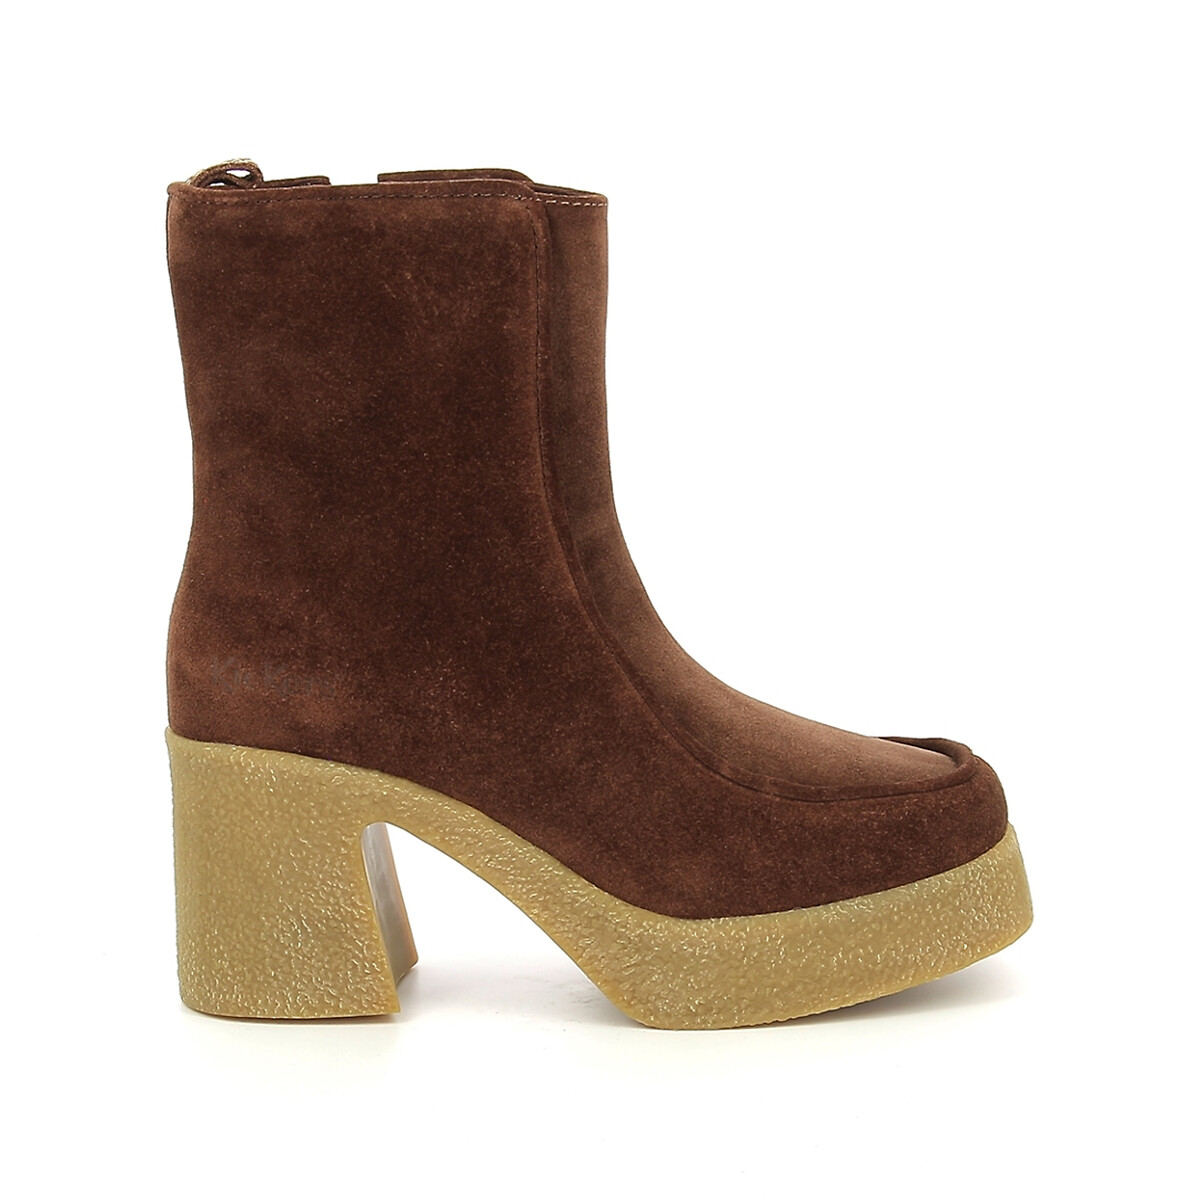 Kick Celest Ankle Boots in Suede with Heel